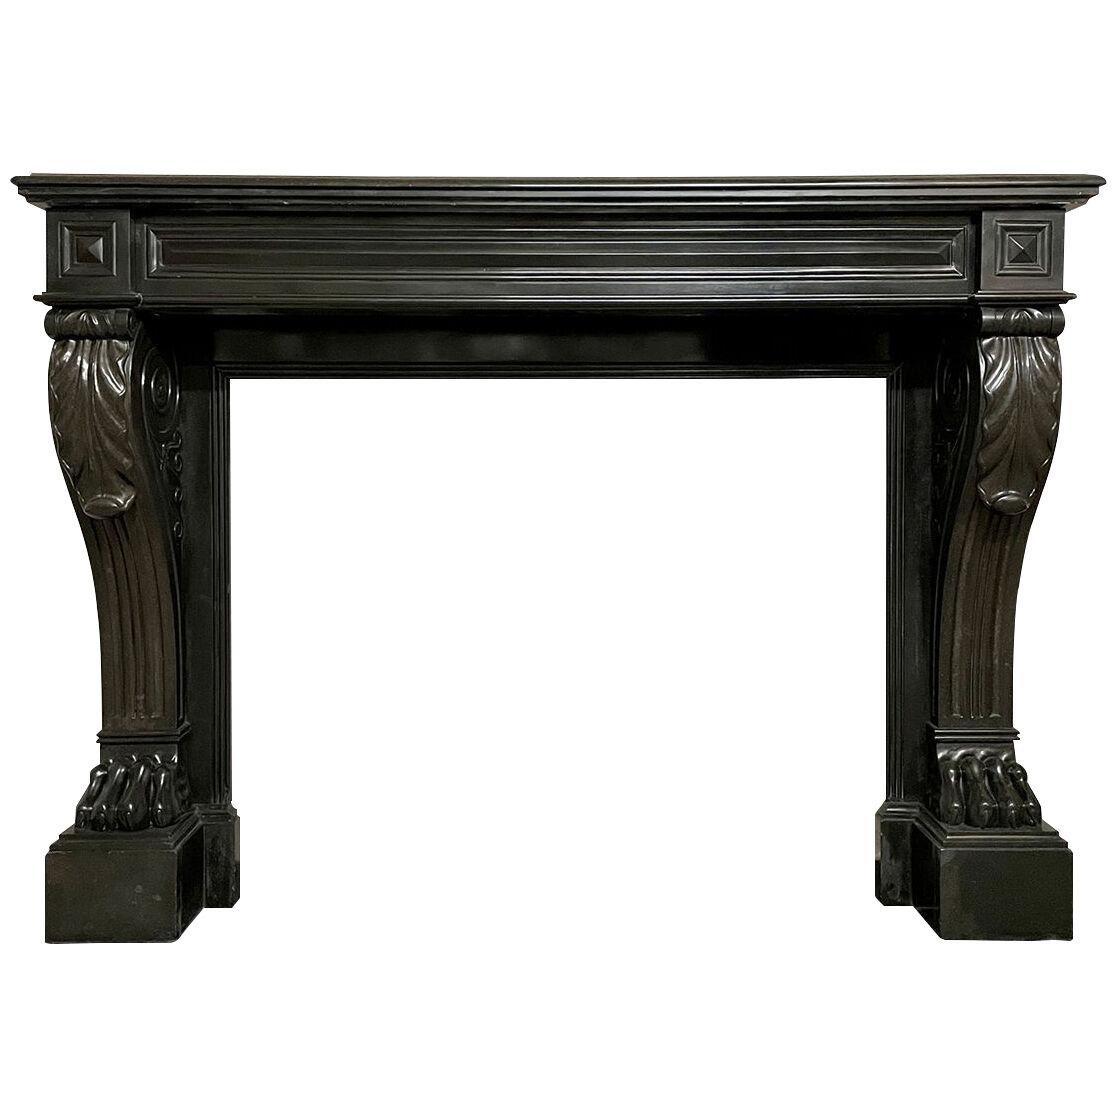 A Large French Empire Black Marble Fireplace Mantel